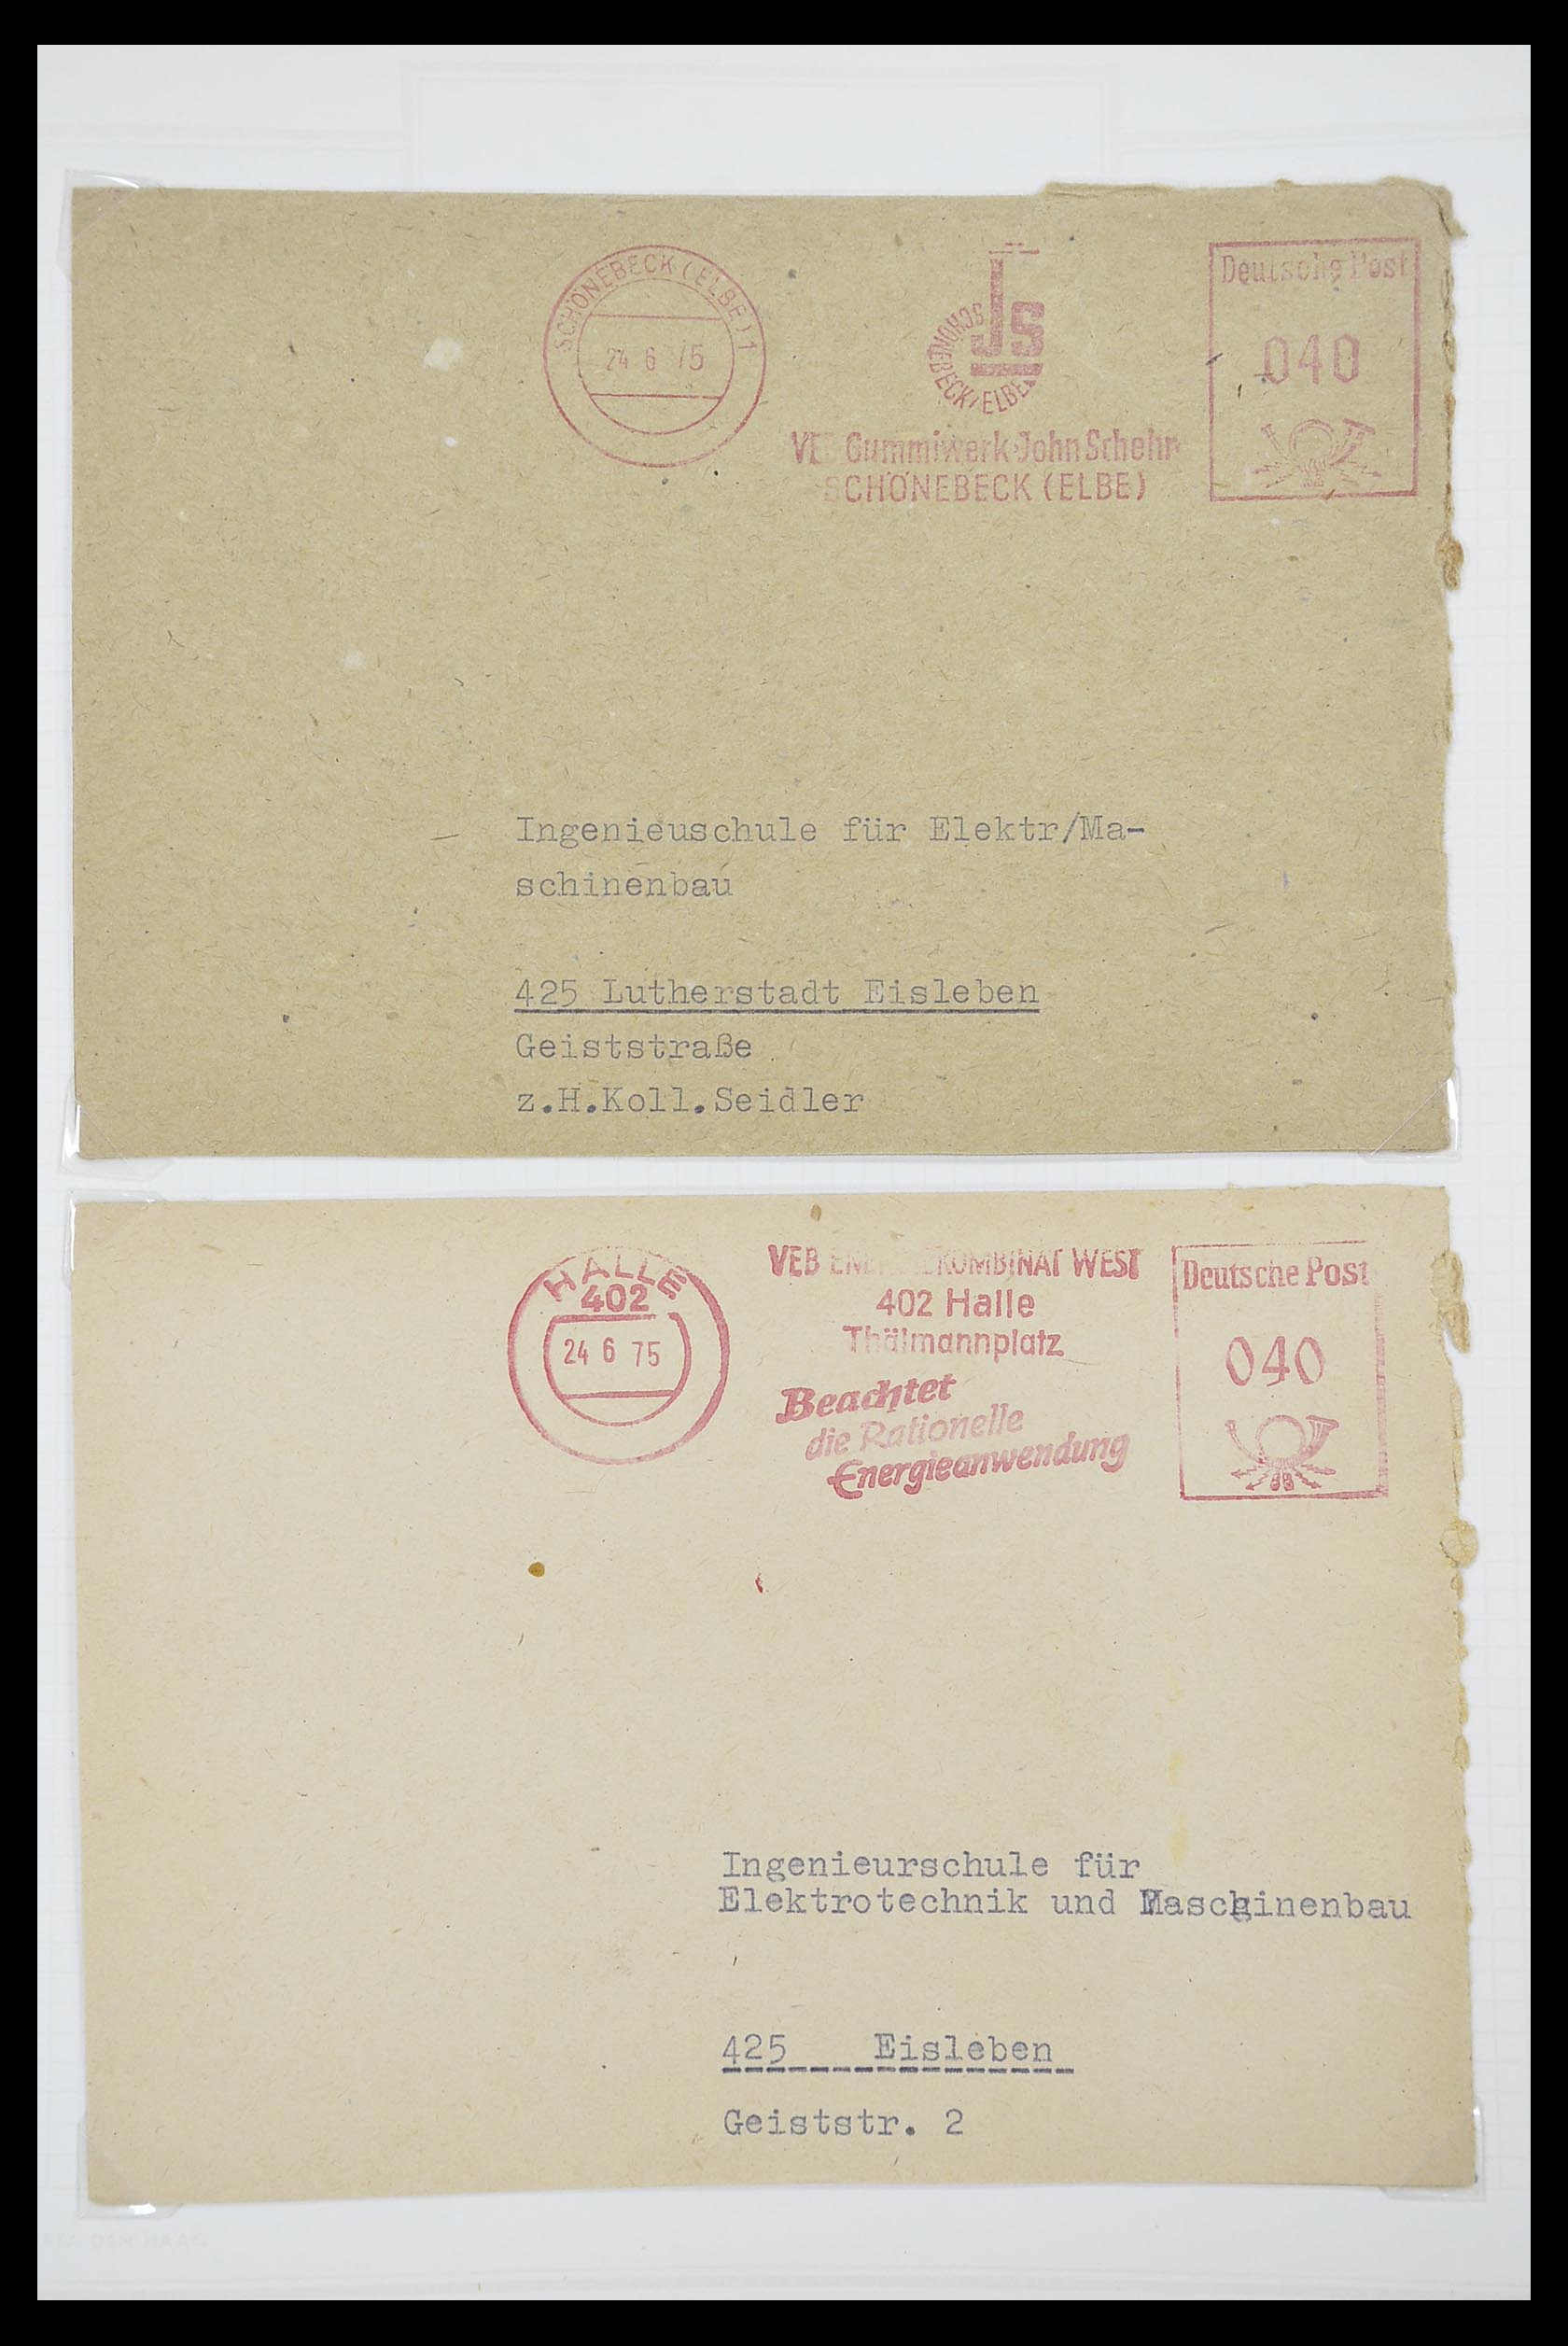 33883 049 - Stamp collection 33883 DDR service covers 1956-1986.